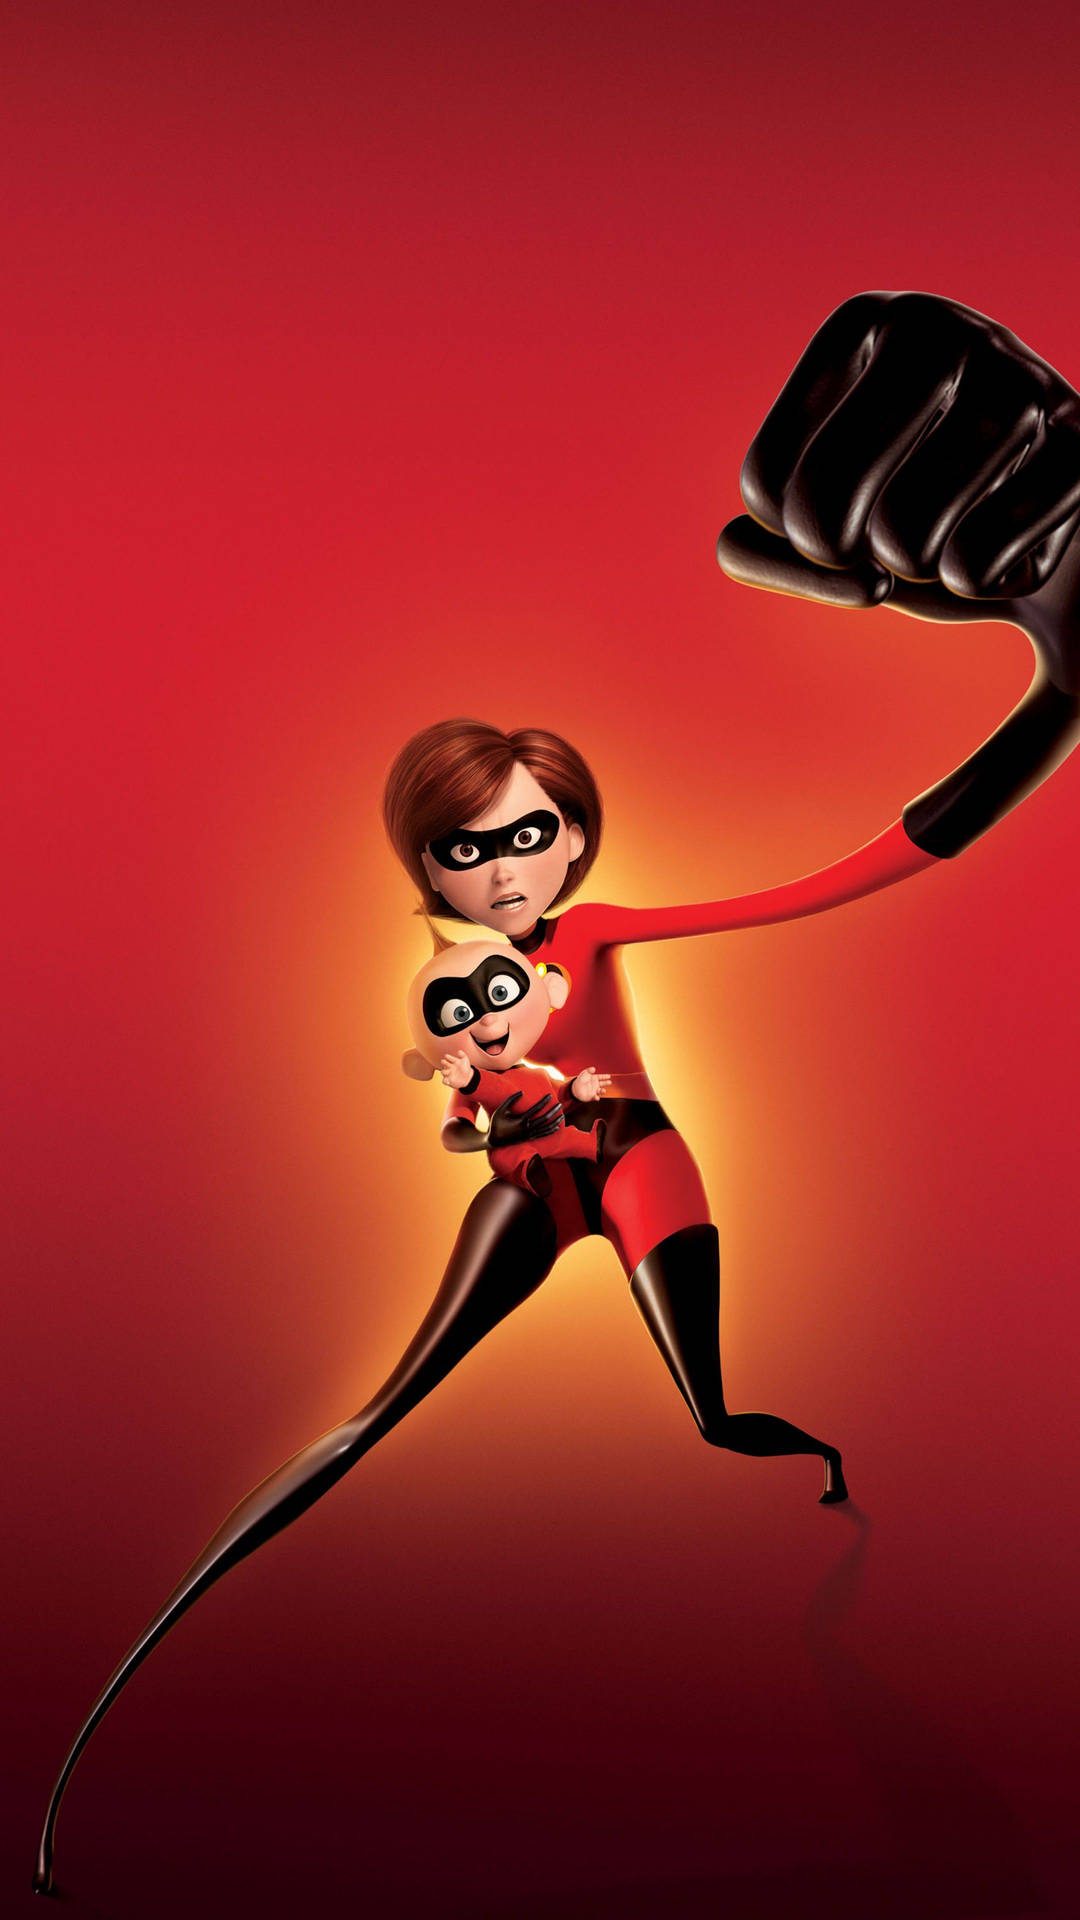 Elastigirl And Jack - Jack From The Incredibles Background